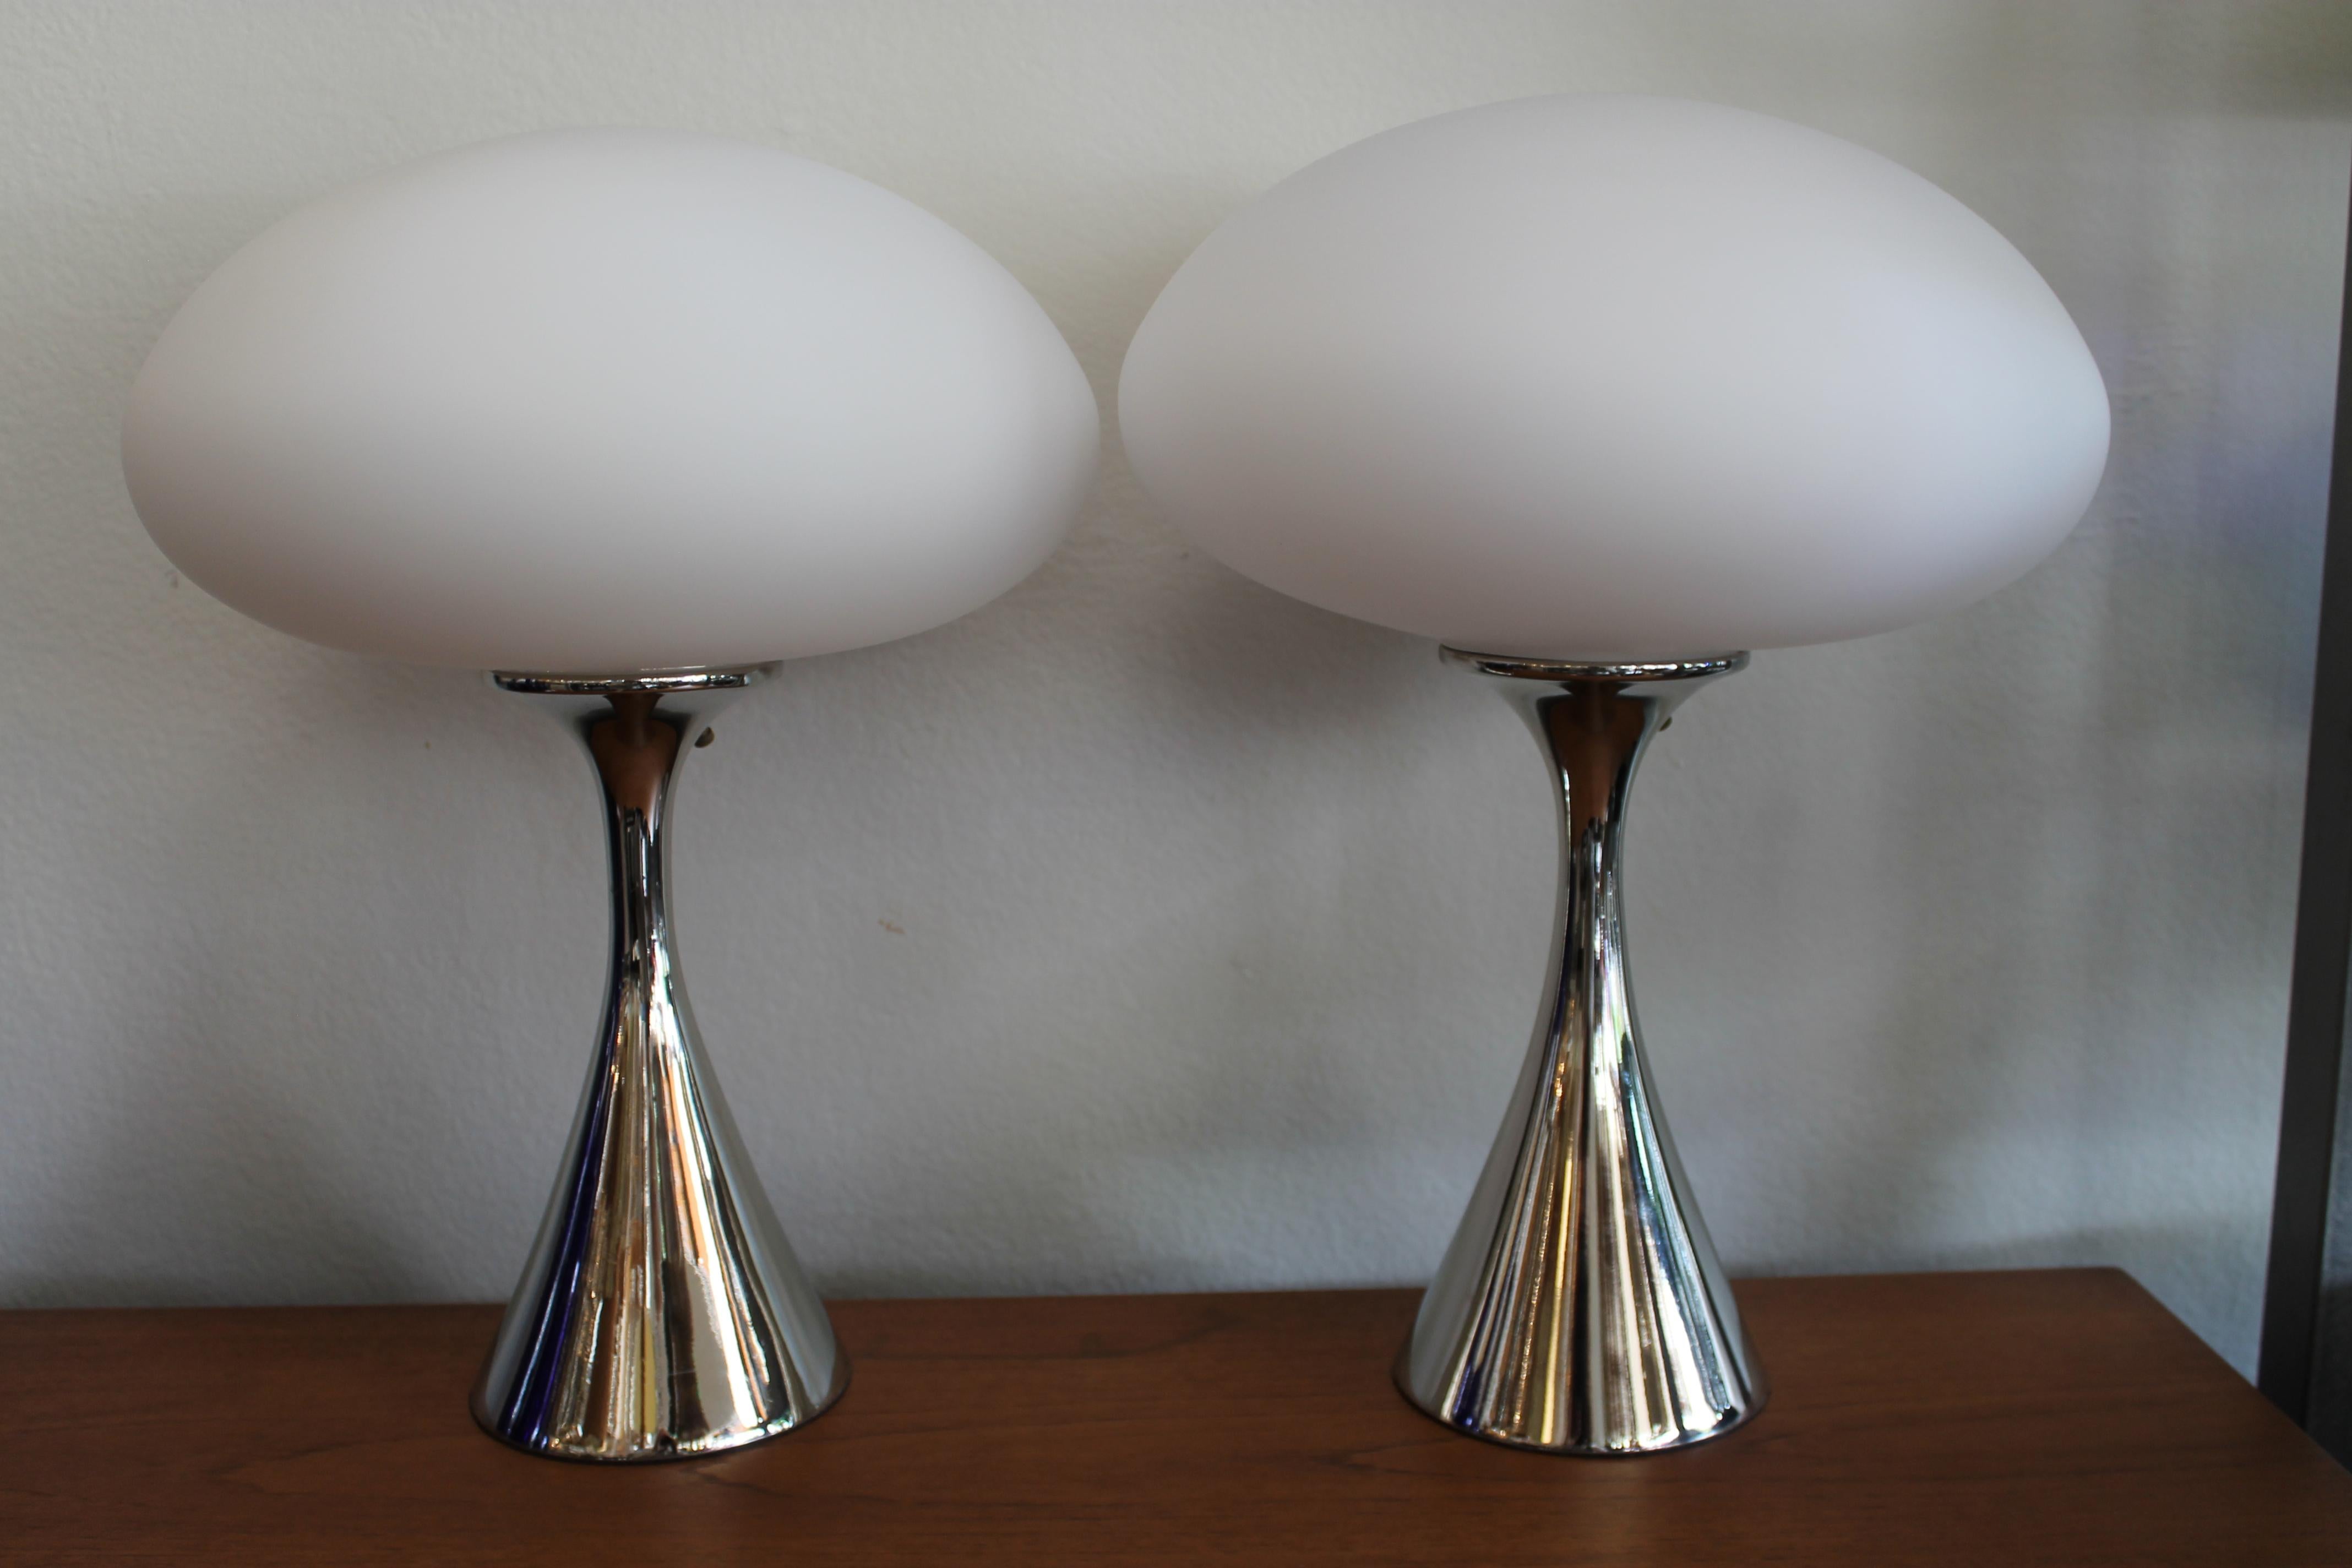 Pair of satin-plated lamps by the Laurel Lamp company, Newark, N.J. Both lamps have the Laurel label. 
 Lamps measure 17